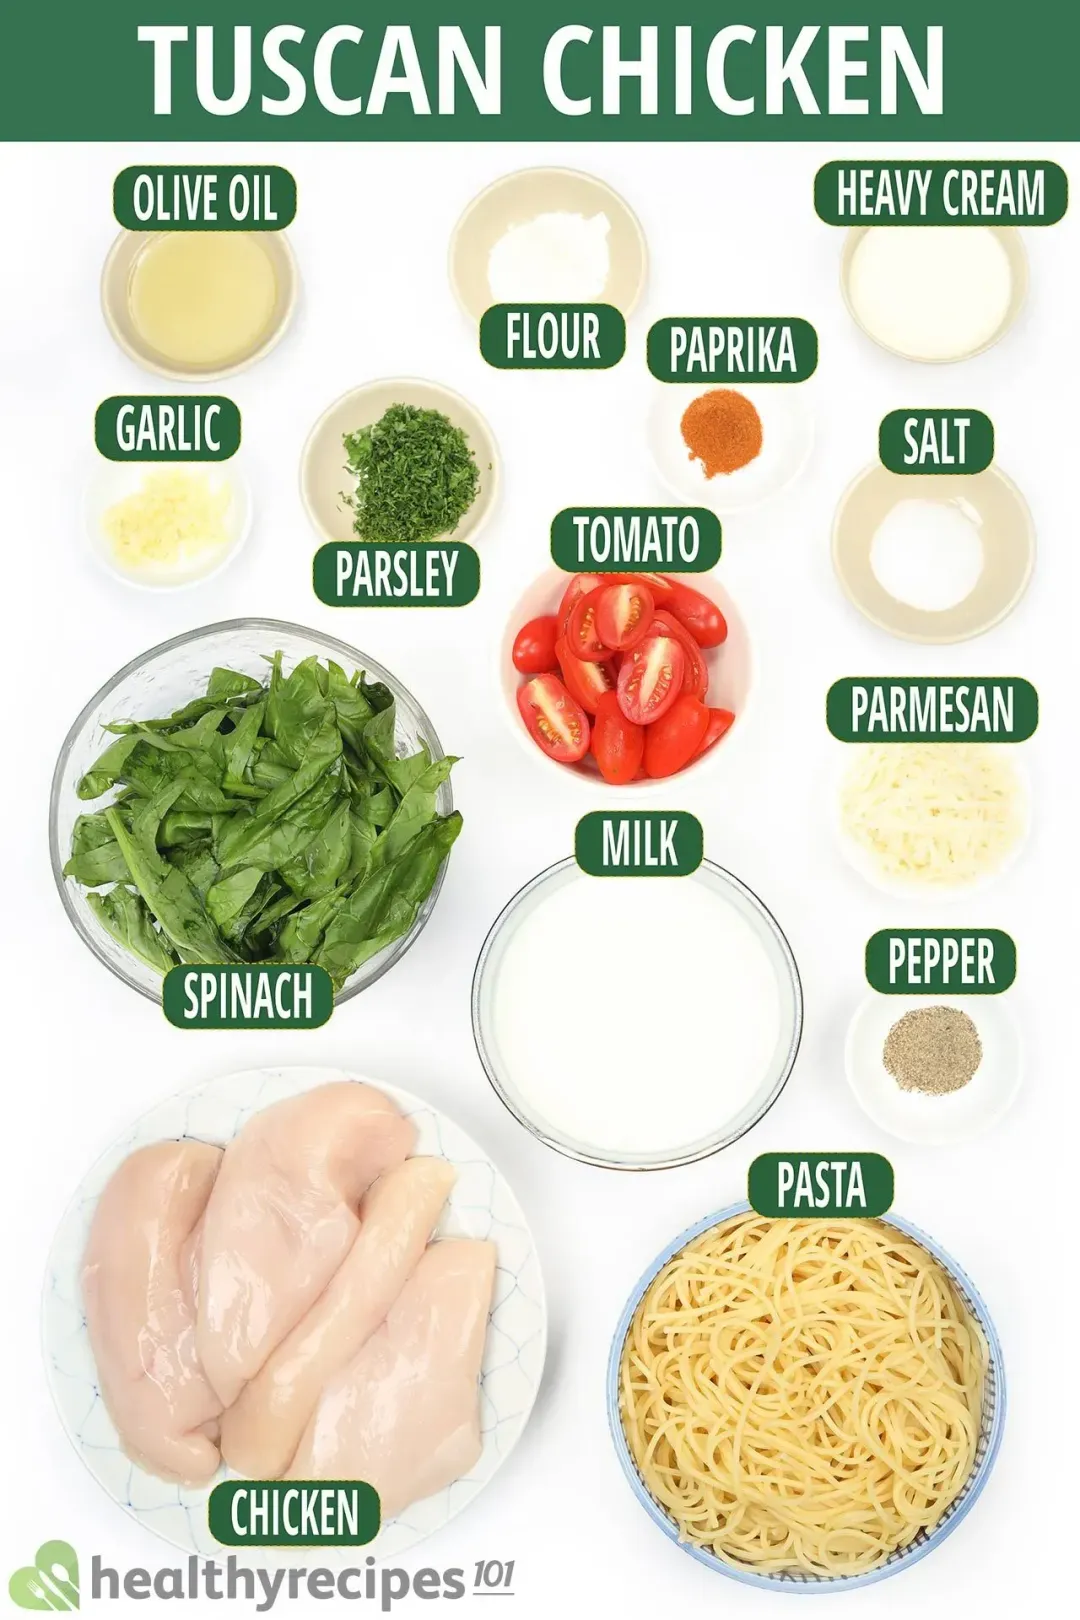 Ingredients for Tuscan Chicken